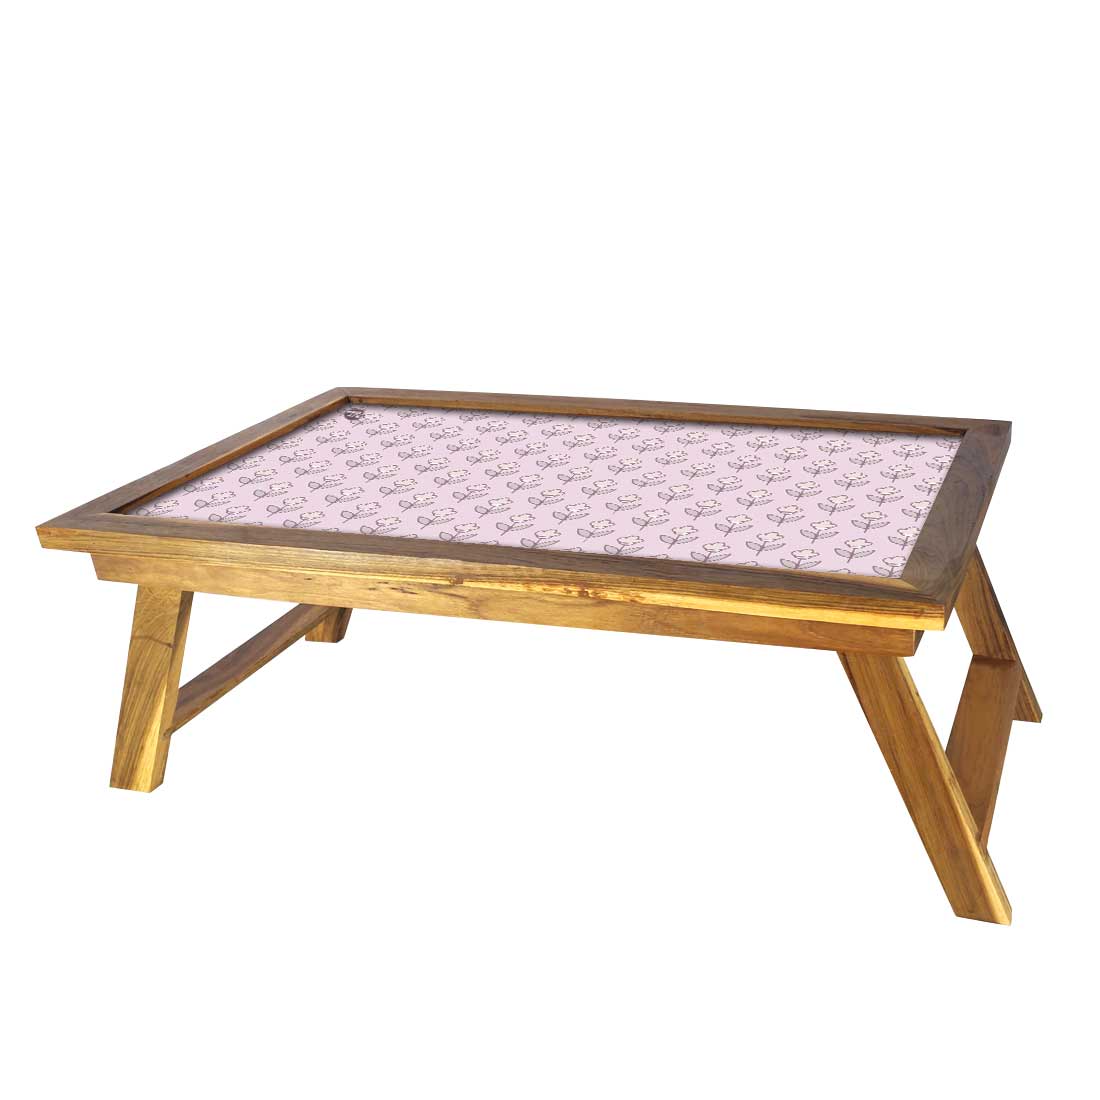 Bed Breakfast Table Wooden & Tray for Home  - Flower Pink Shade Nutcase